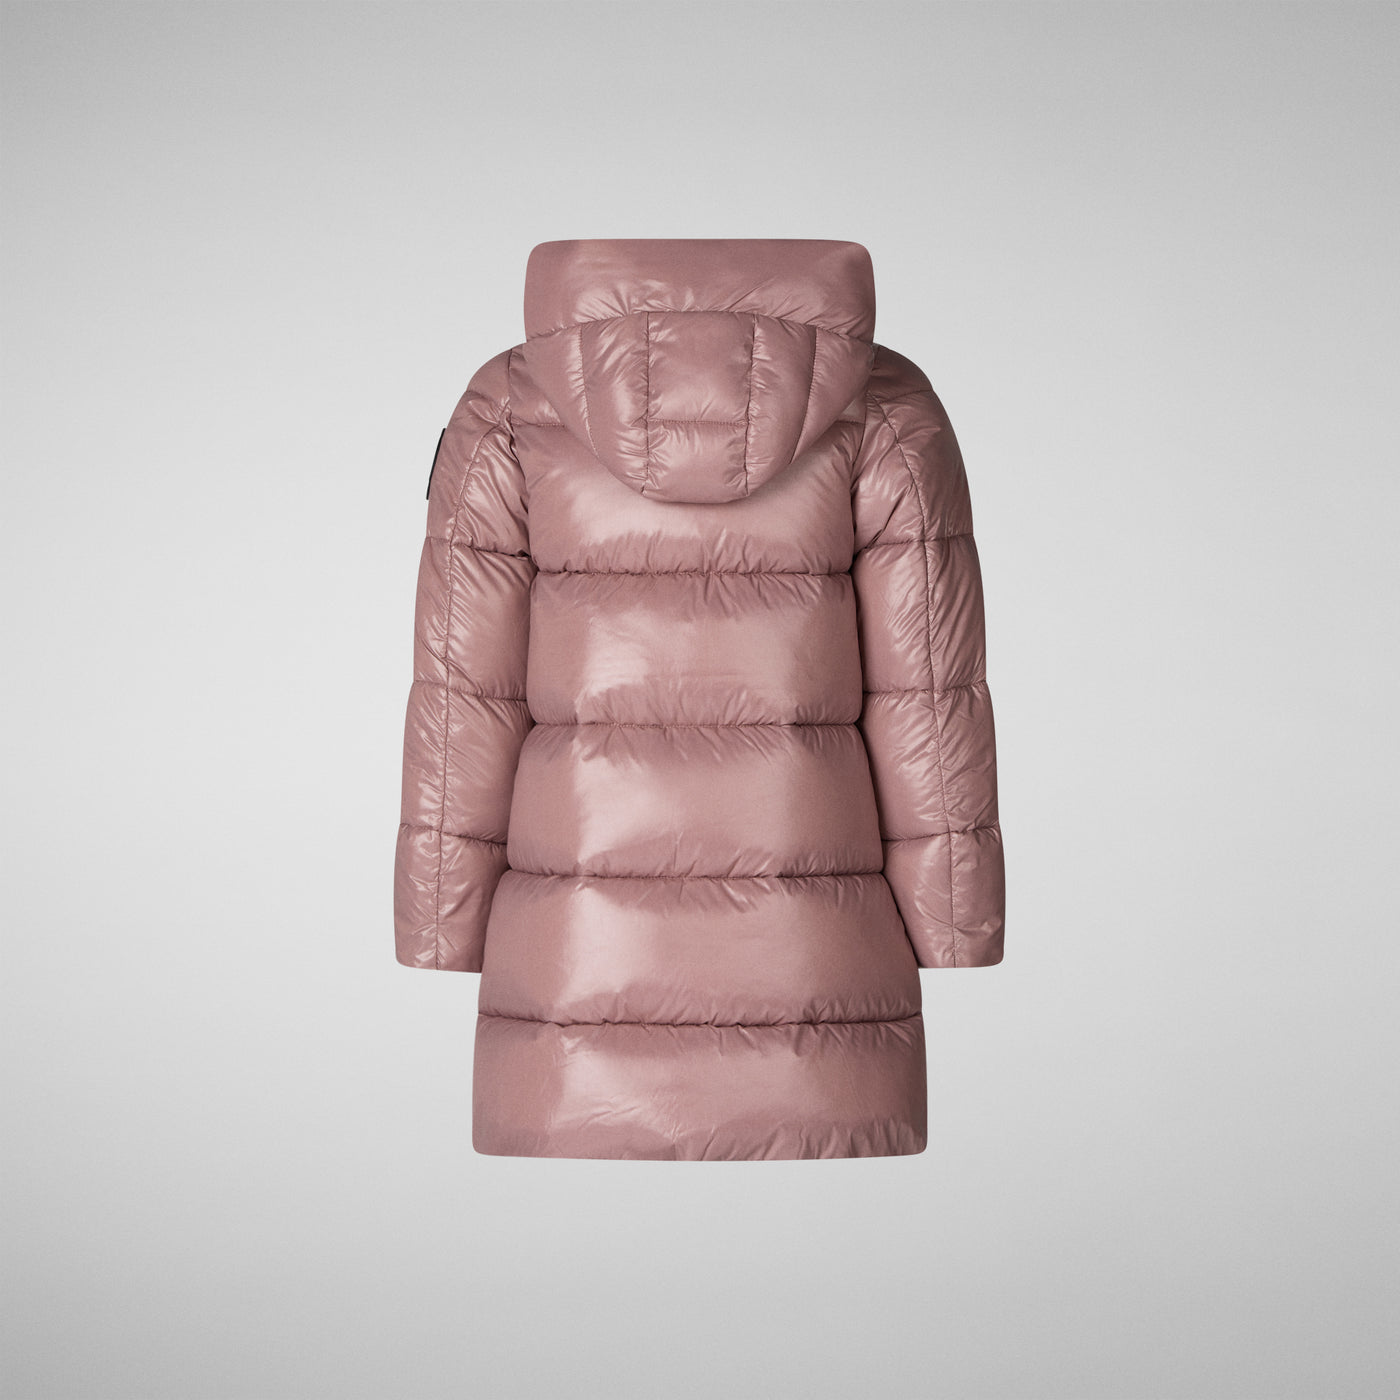 Back Product View of Girls' Millie Hooded Puffer Coat in Withered Rose